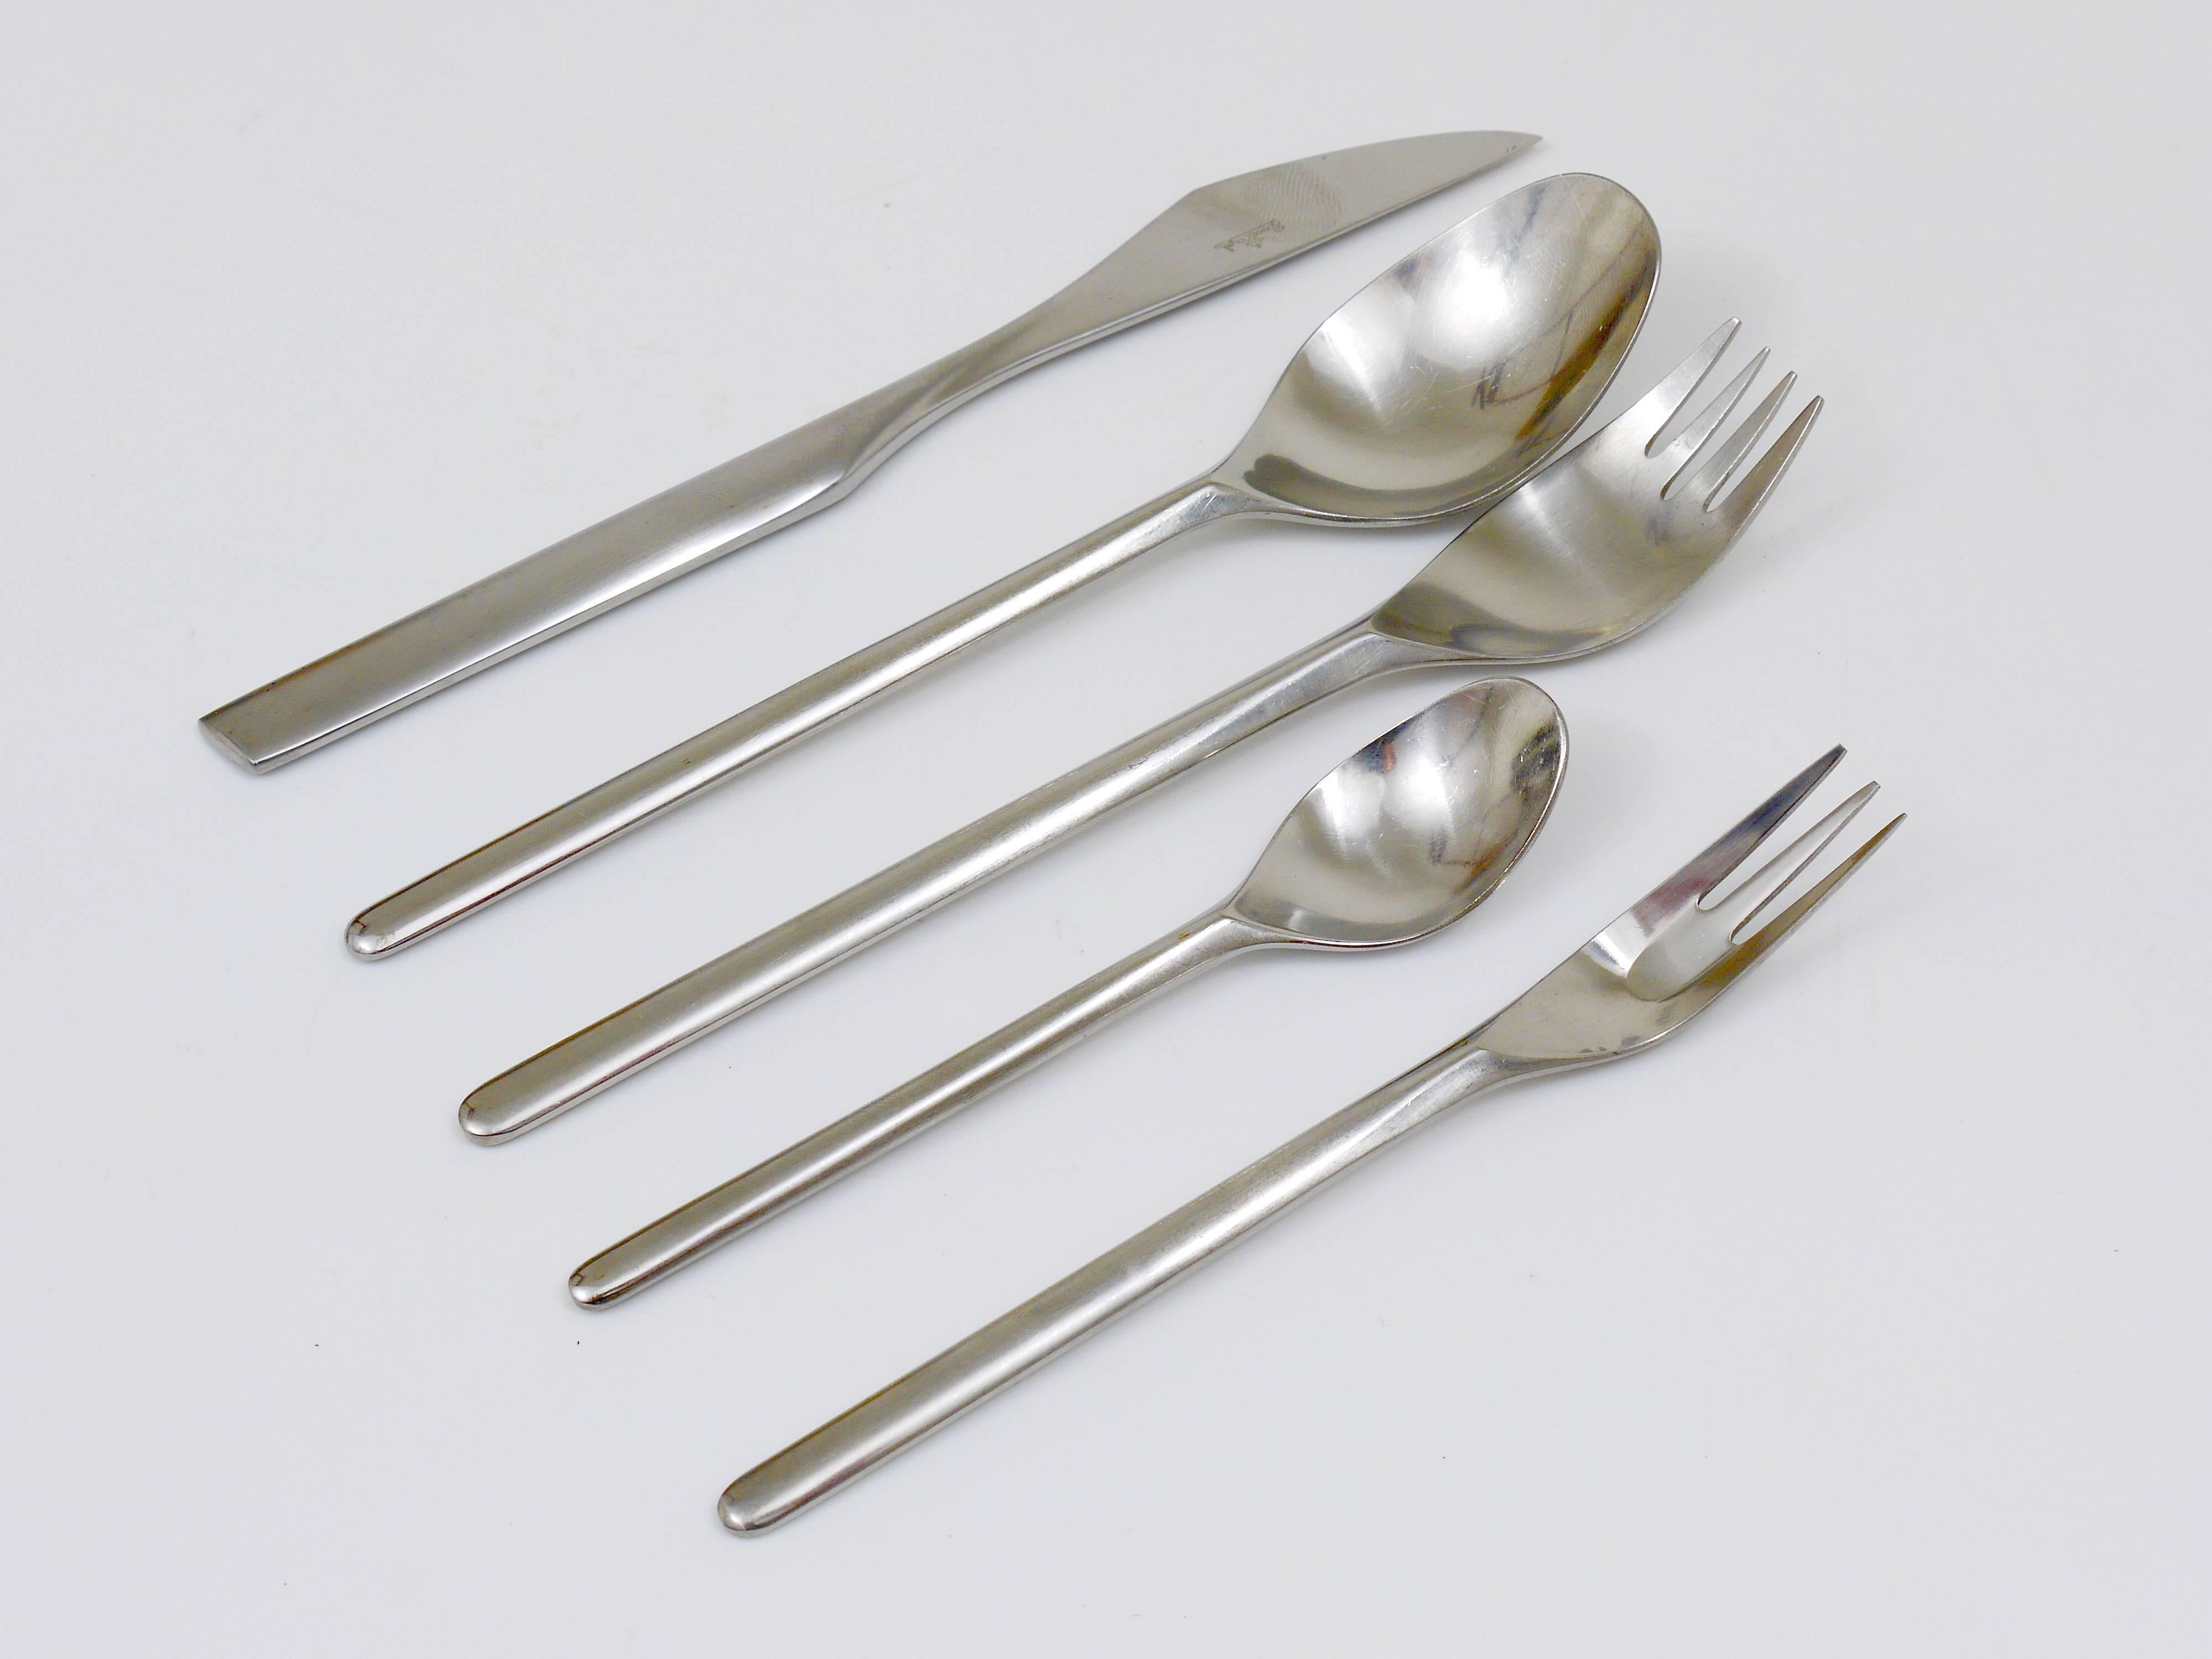 Beautiful modernist flatware, designed by Tapio Wirkkala in 1963, executed by Rosenthal Germany. High-quality flatware, made of stainless steel.  For 6 persons, consists of 6 big spoons, forks and knives and 6 small spoons and forks. 30 pieces. In